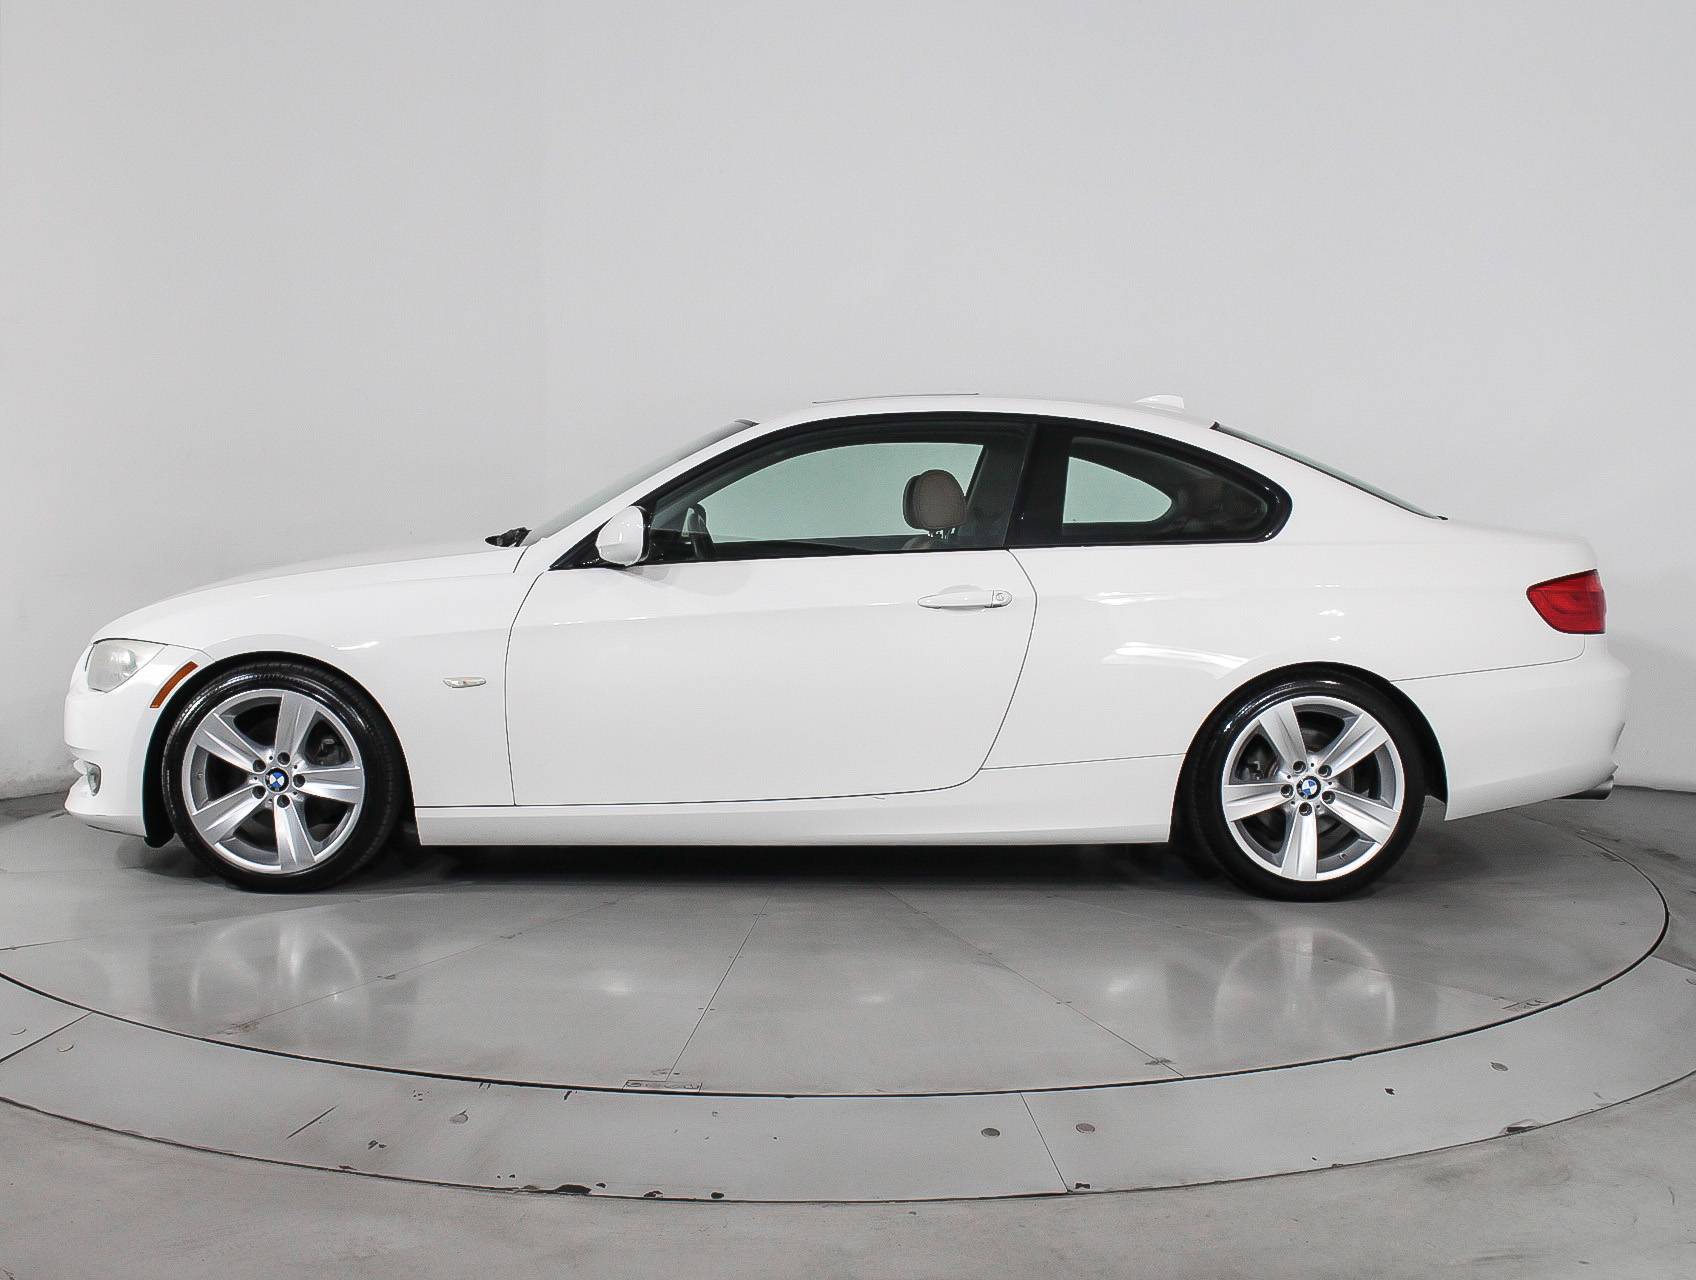 Used 2011 Bmw 3 Series 328i Coupe For Sale In Miami Fl